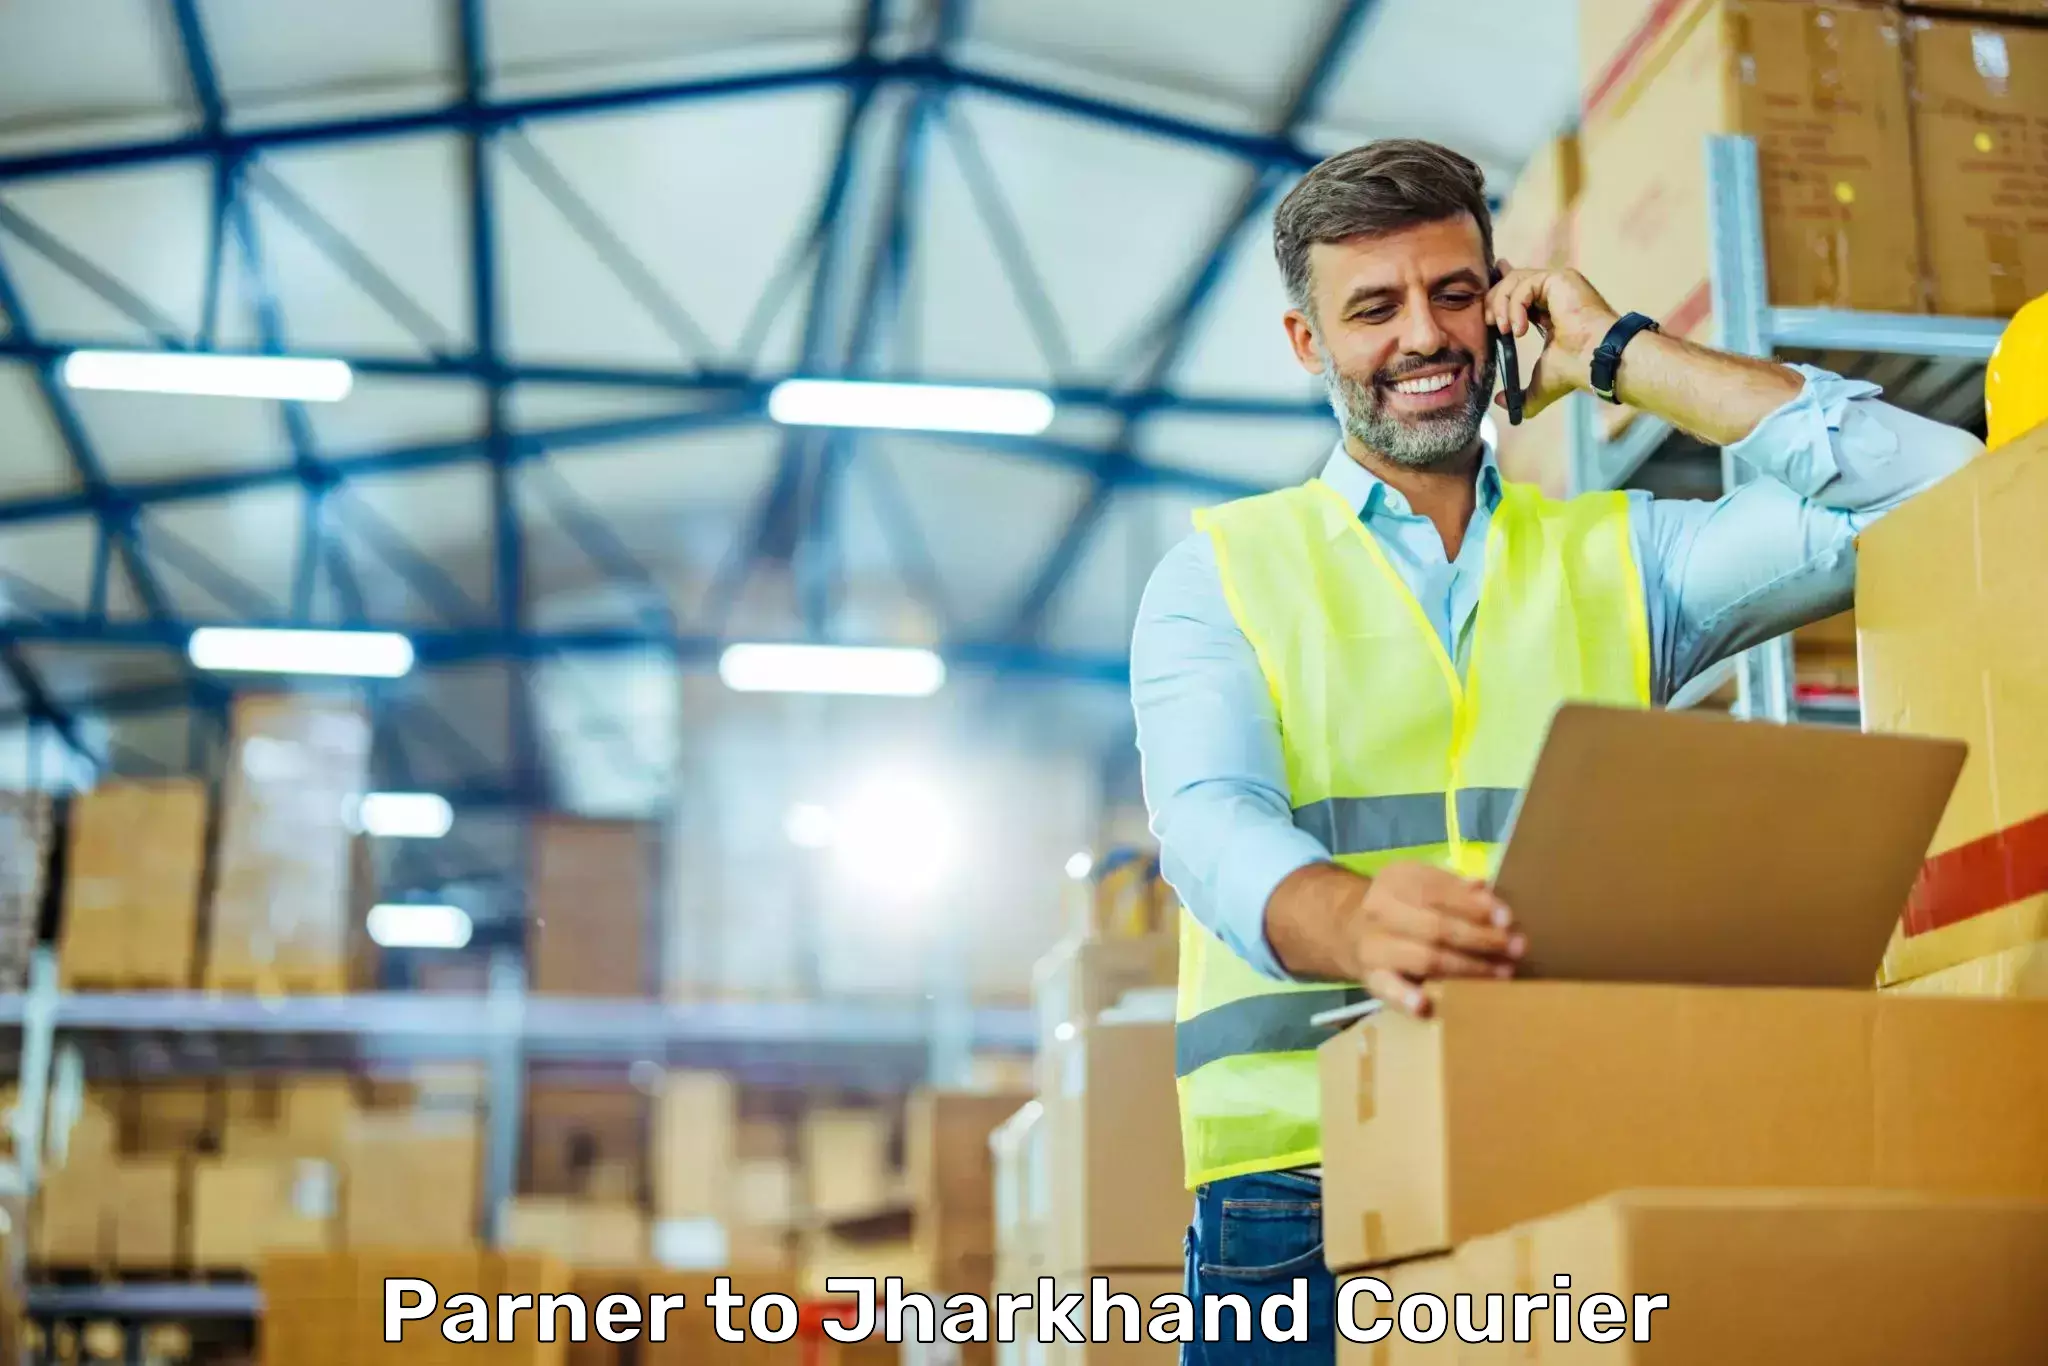 Efficient package consolidation in Parner to Jharkhand